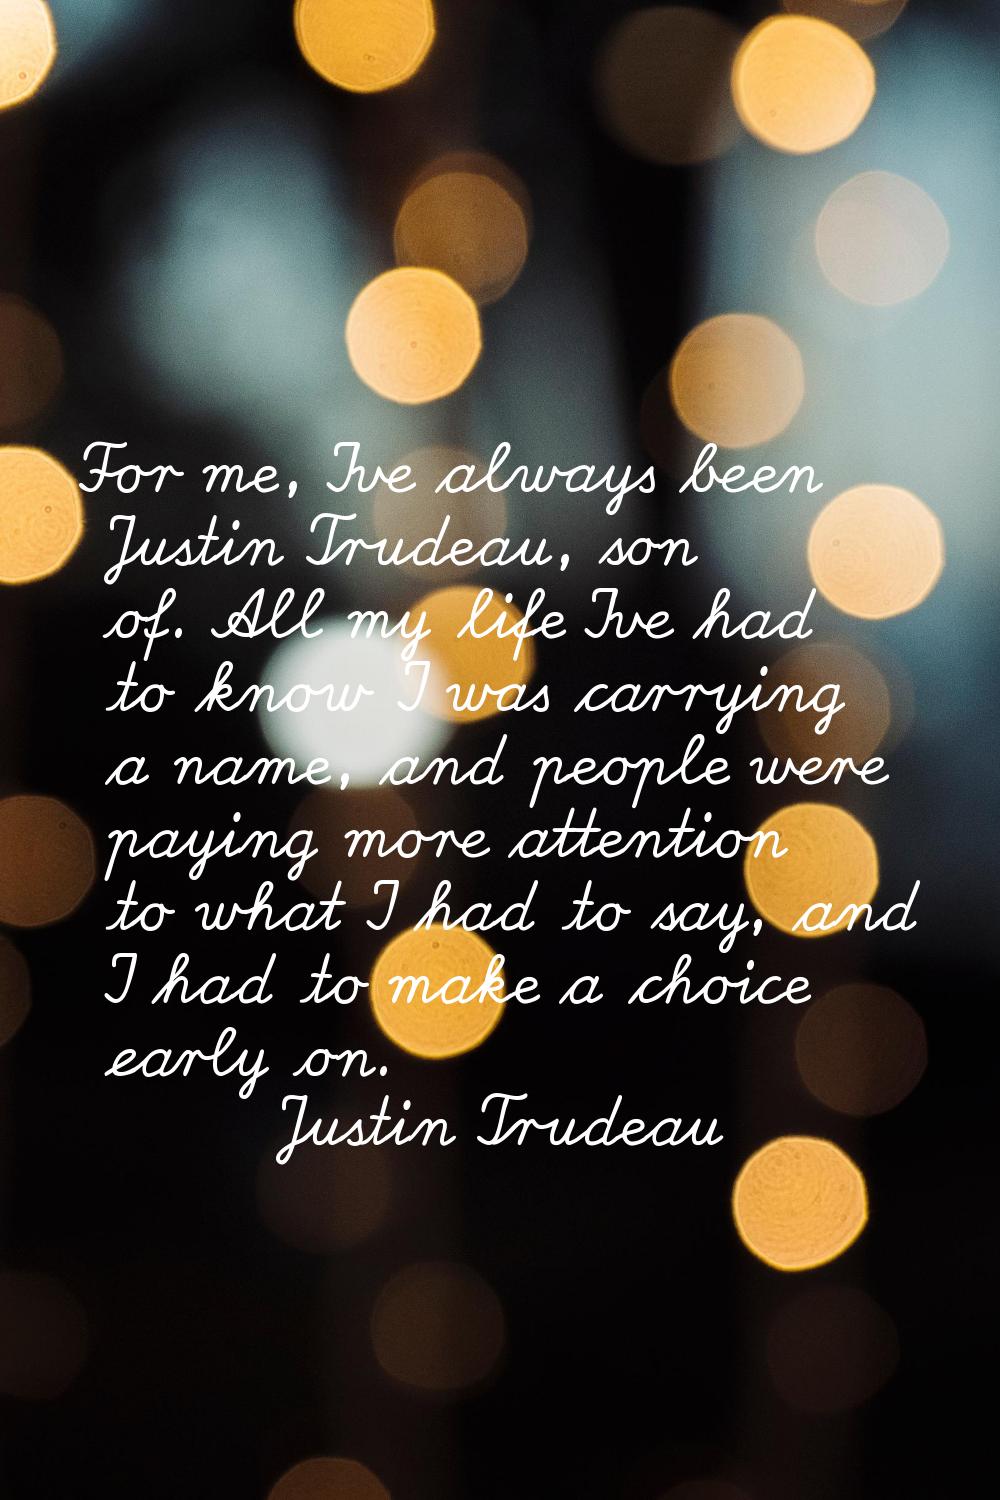 For me, I've always been Justin Trudeau, son of. All my life I've had to know I was carrying a name